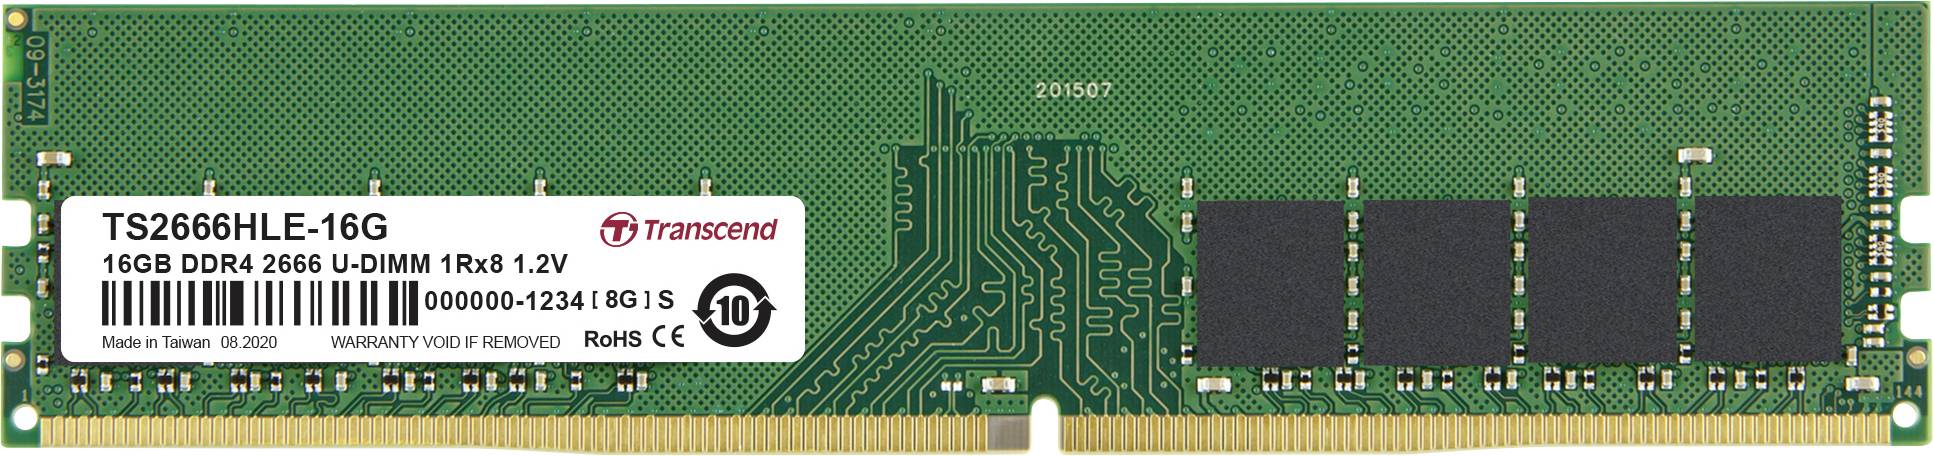 TRANSCEND TS2666HLE-16G 16GB